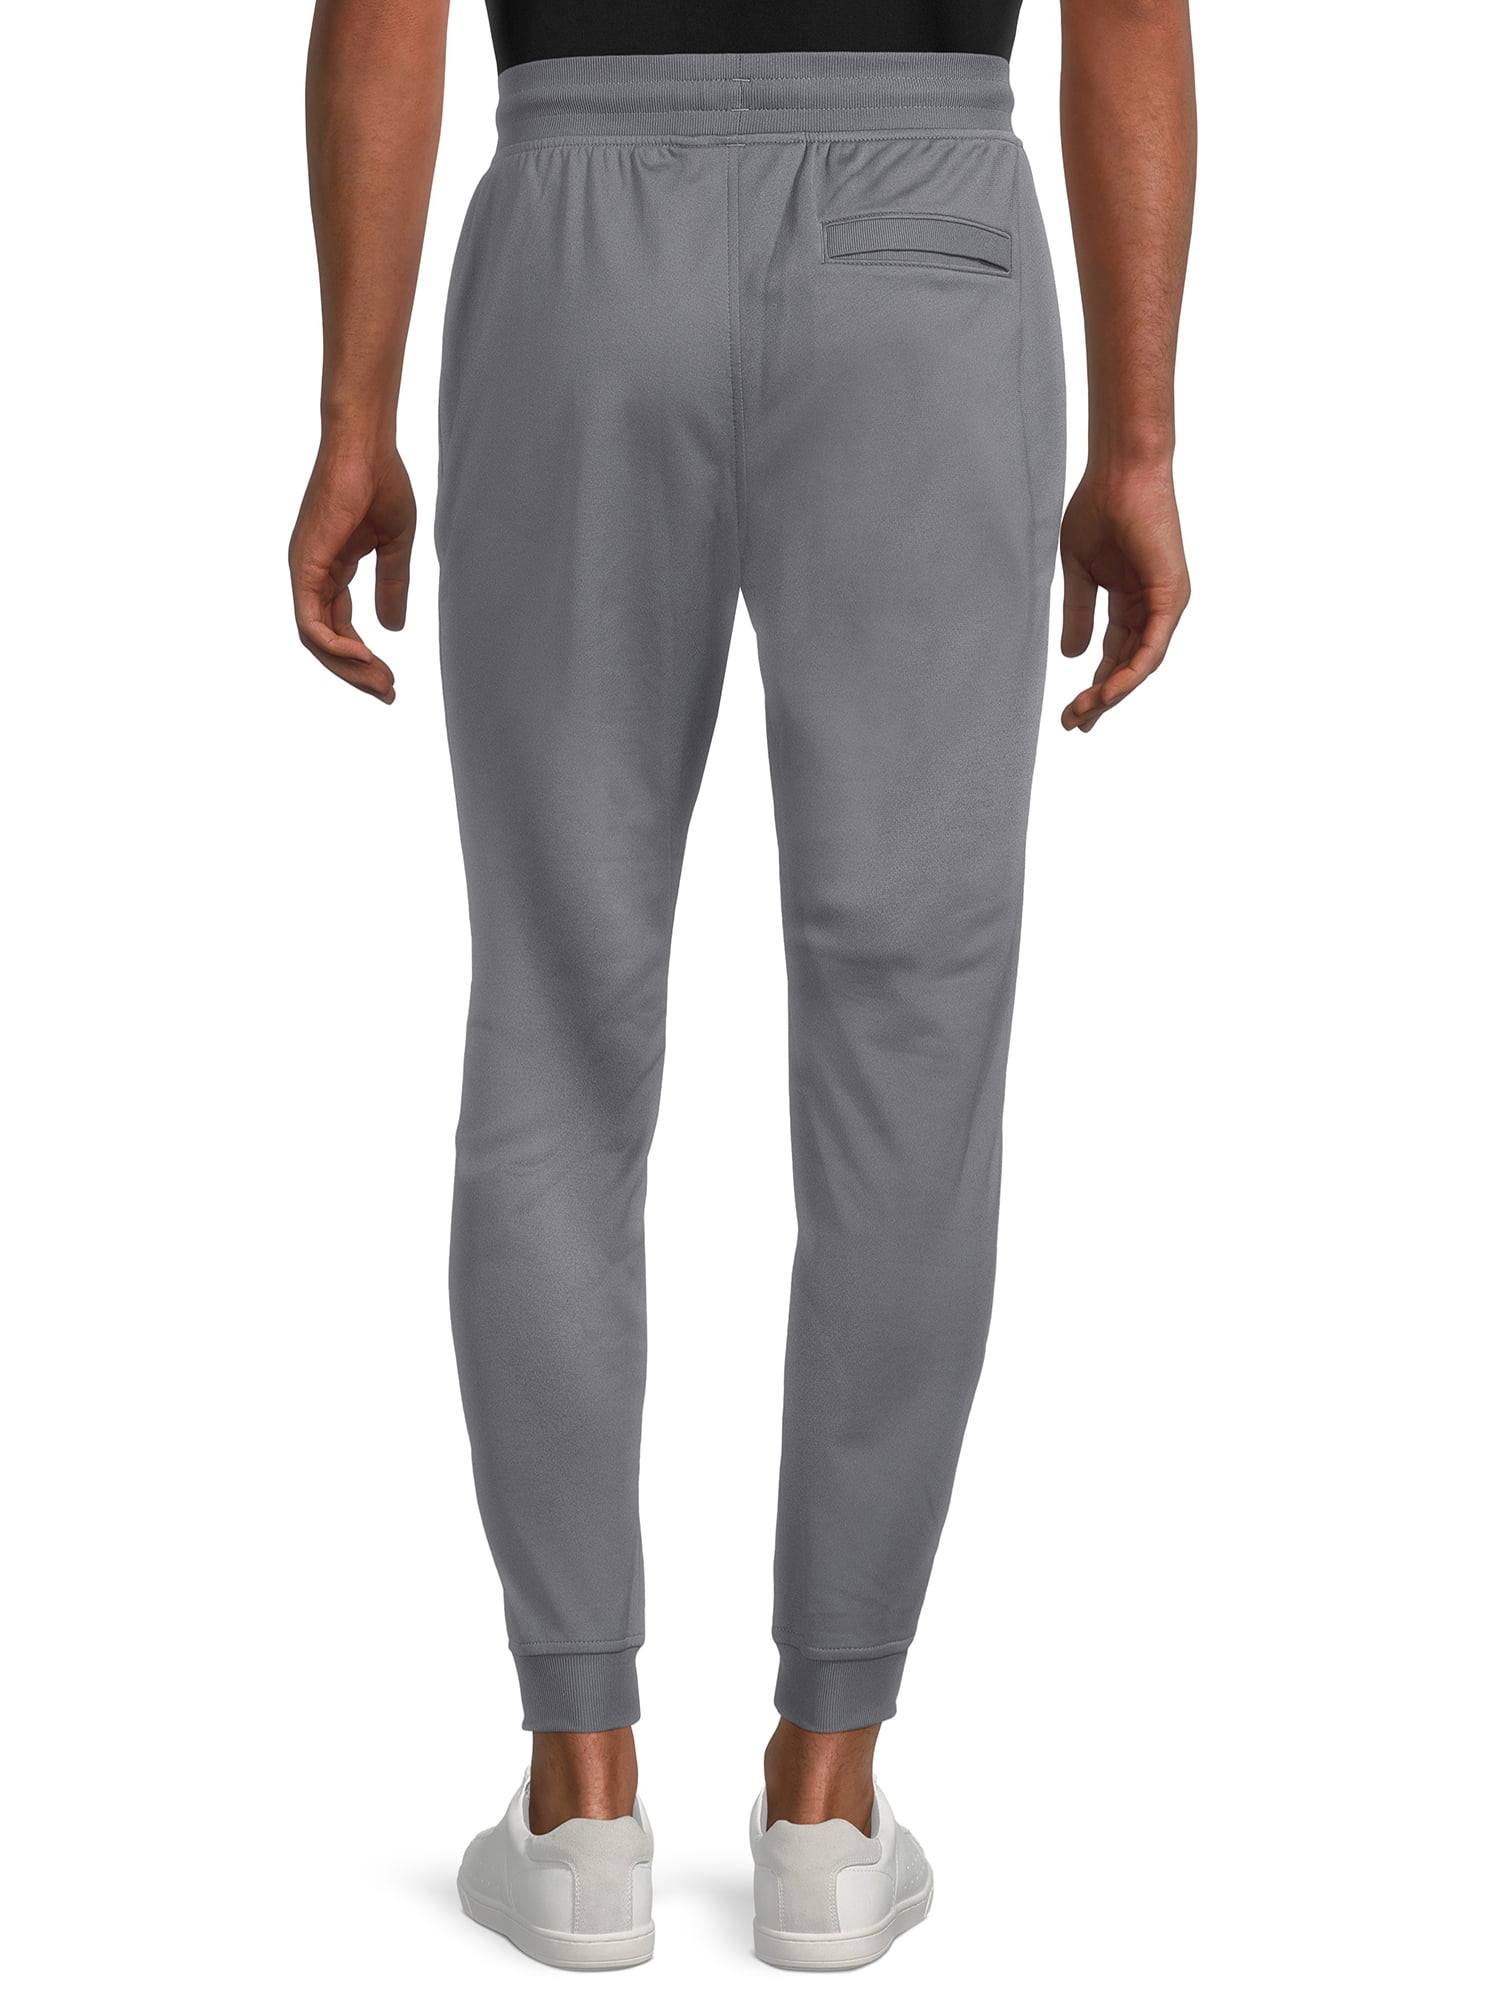 Under Armour Men's and Big Men's UA Sportstyle Tricot Joggers, up